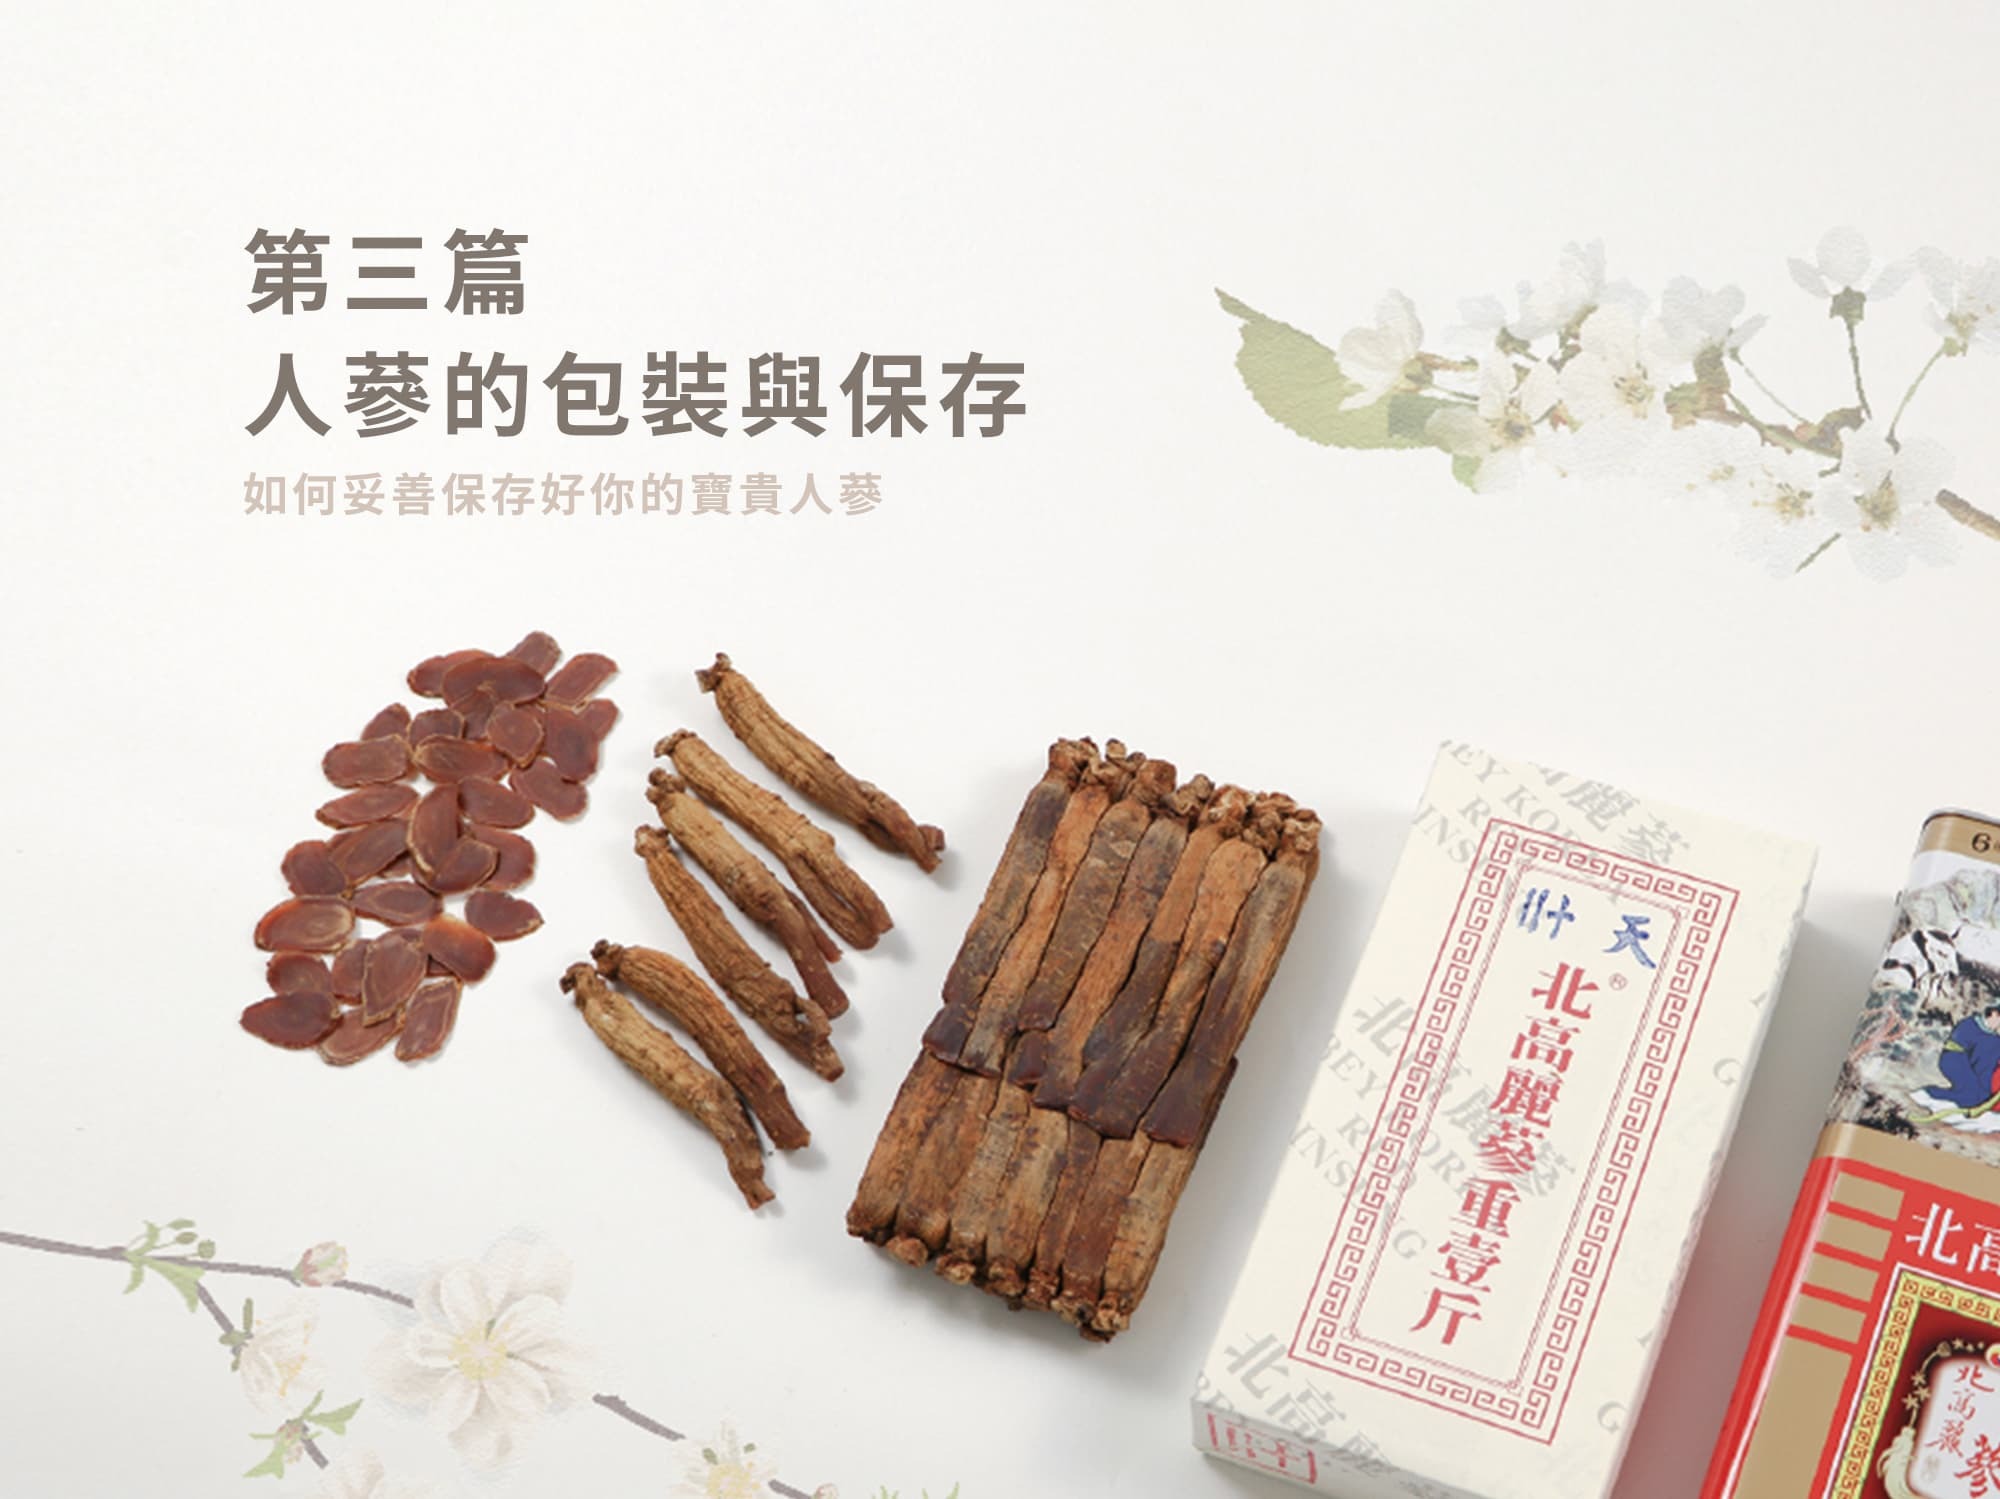 different ginseng products